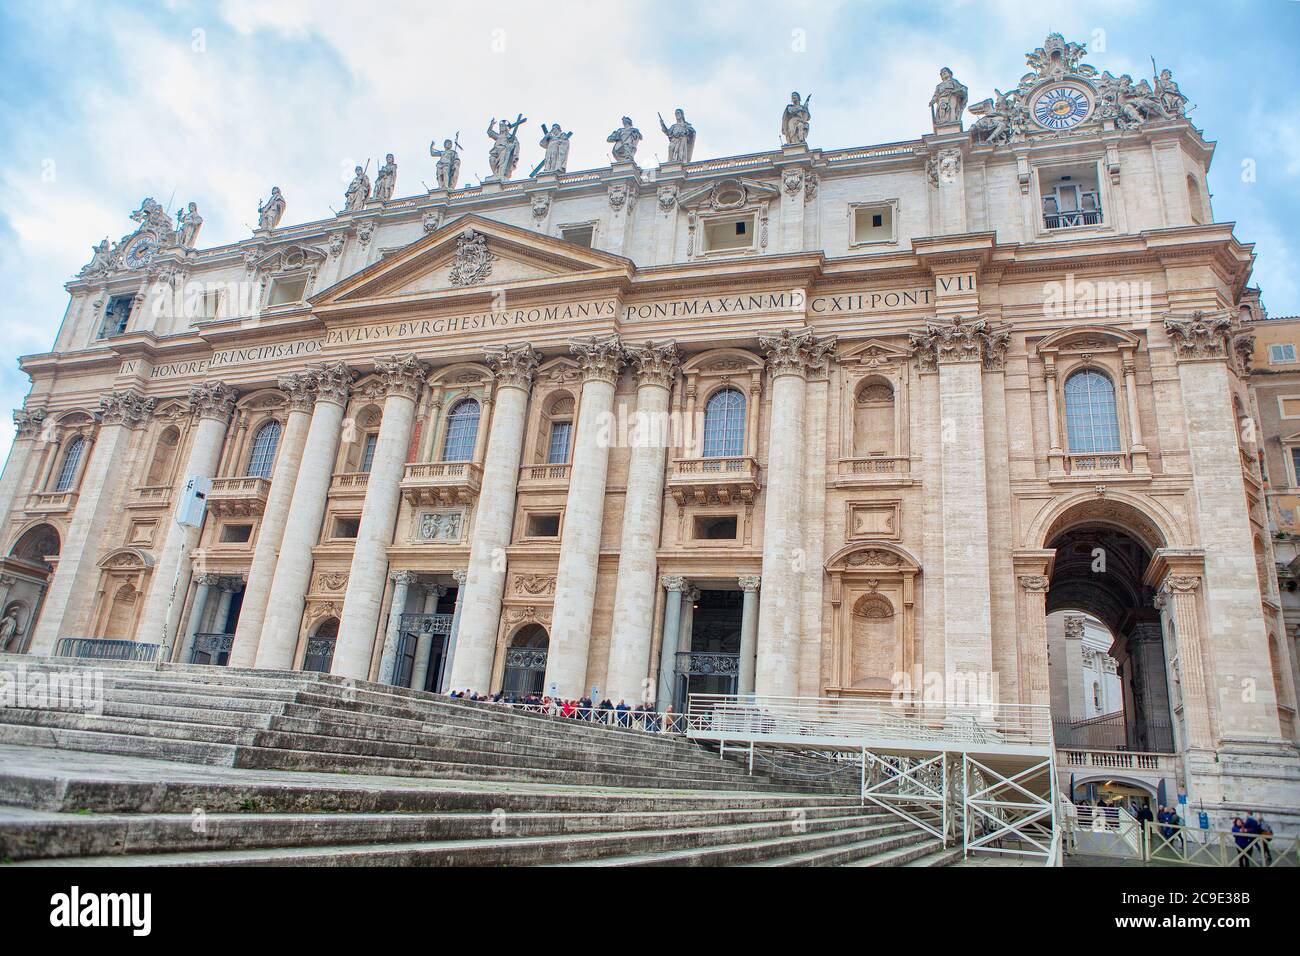 Largest church building in the world . Facade of St. Peter's Basilica in Vatican . Papal Basilica of Saint Peter Stock Photo